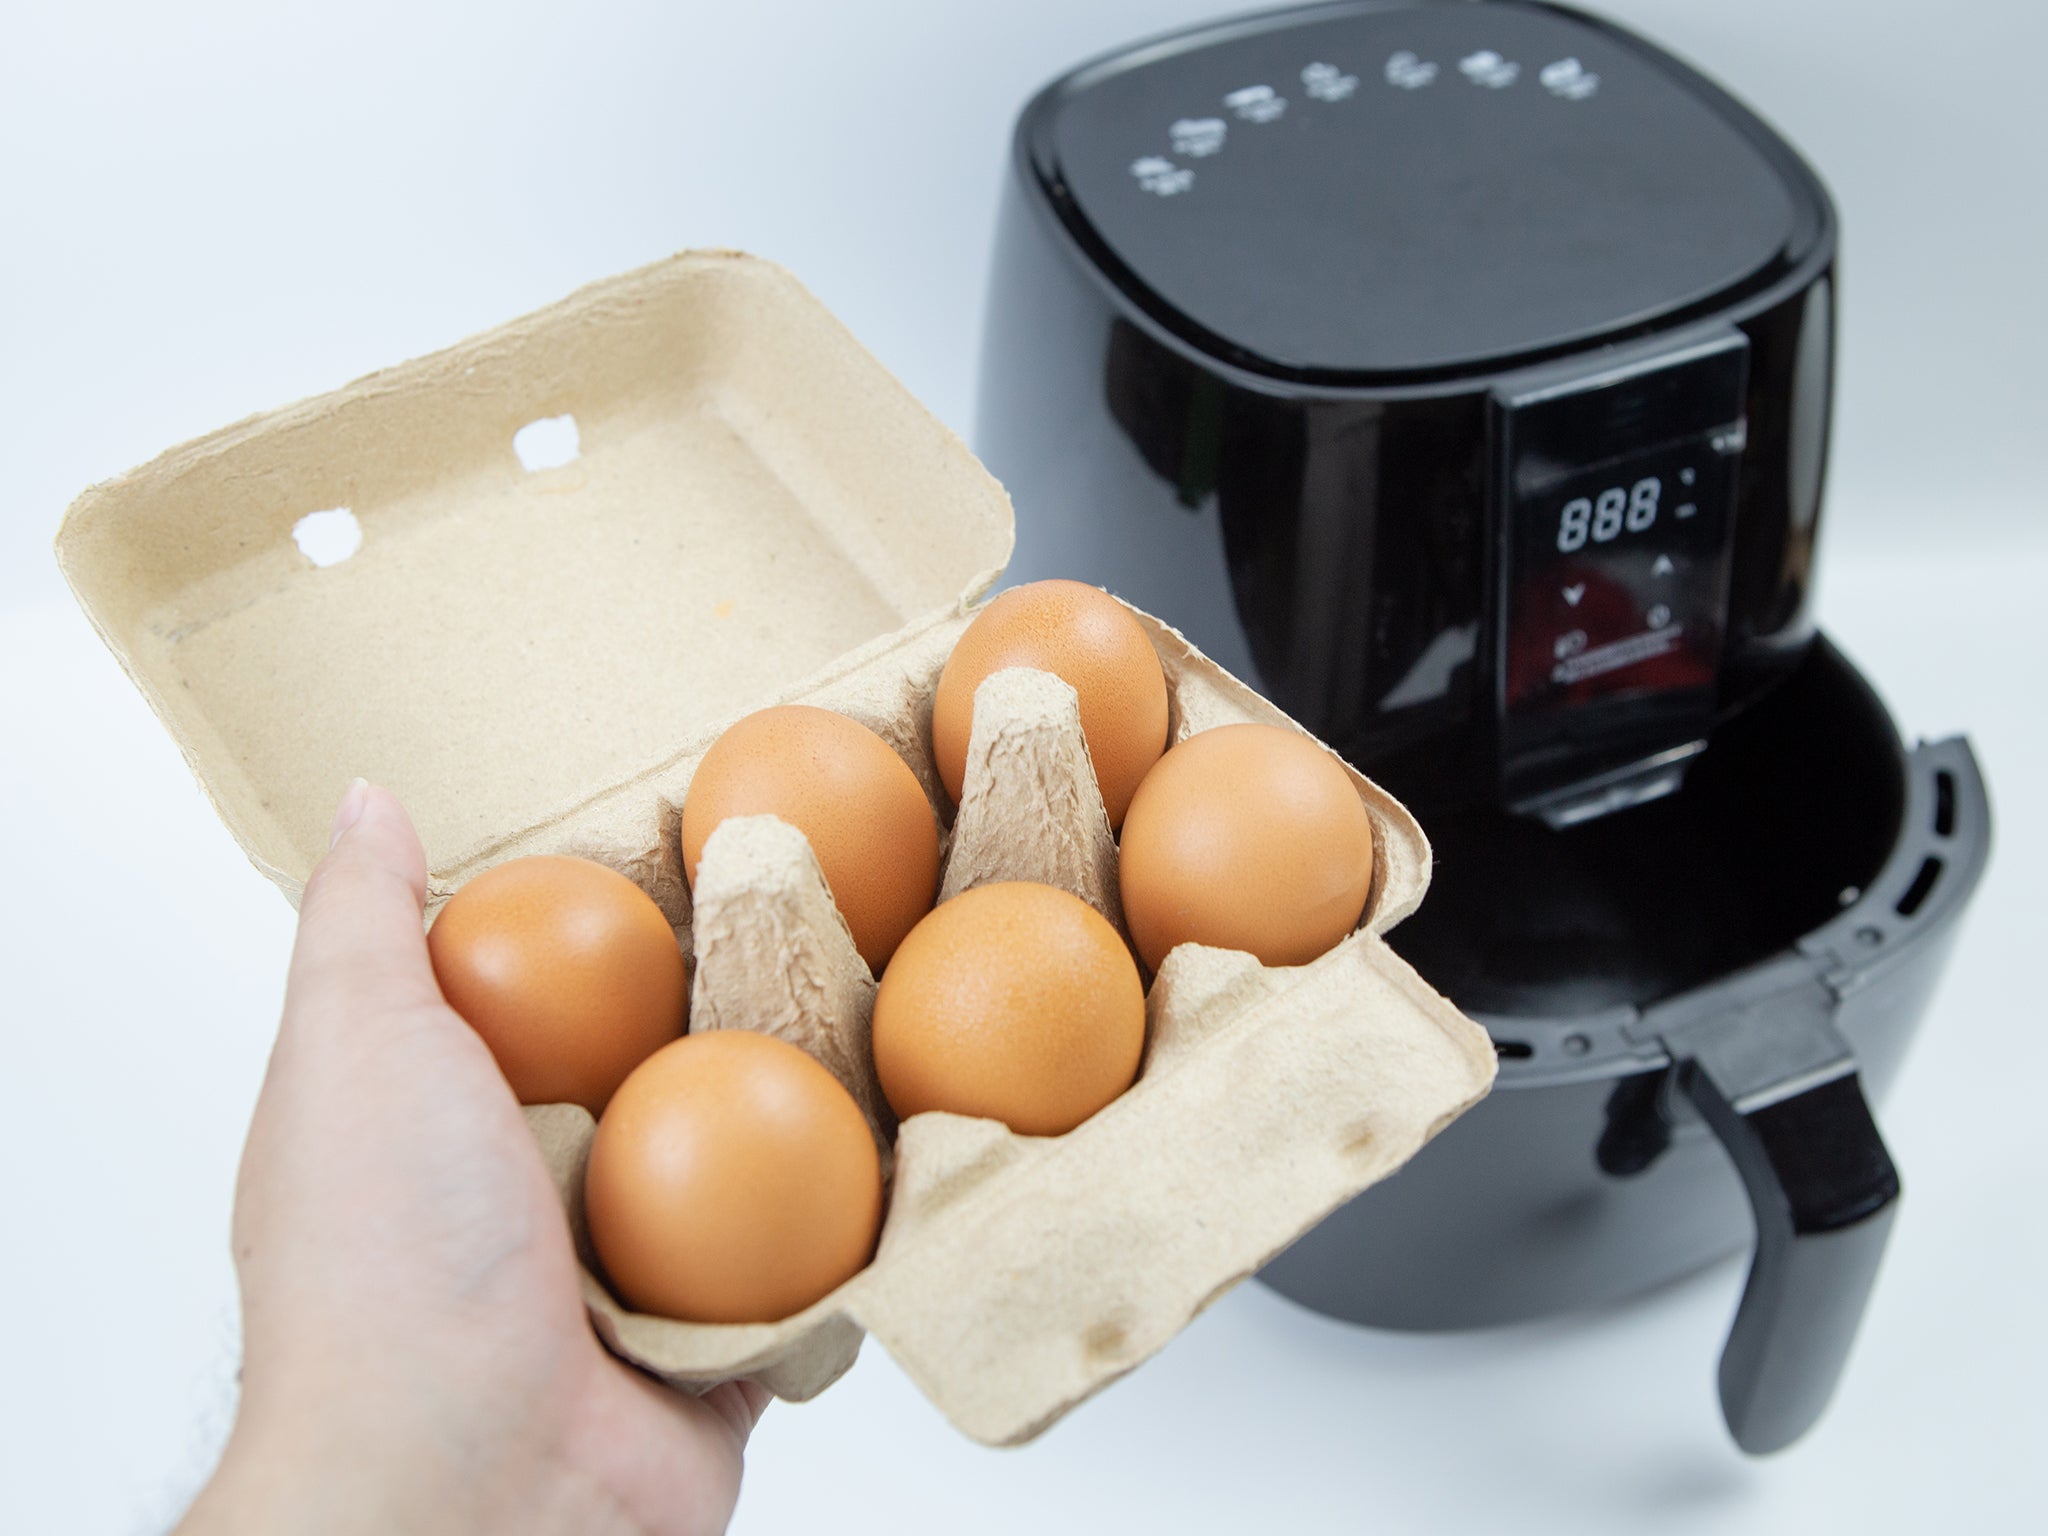 Putting all your eggs in one basket will pay off when it comes to air fryers